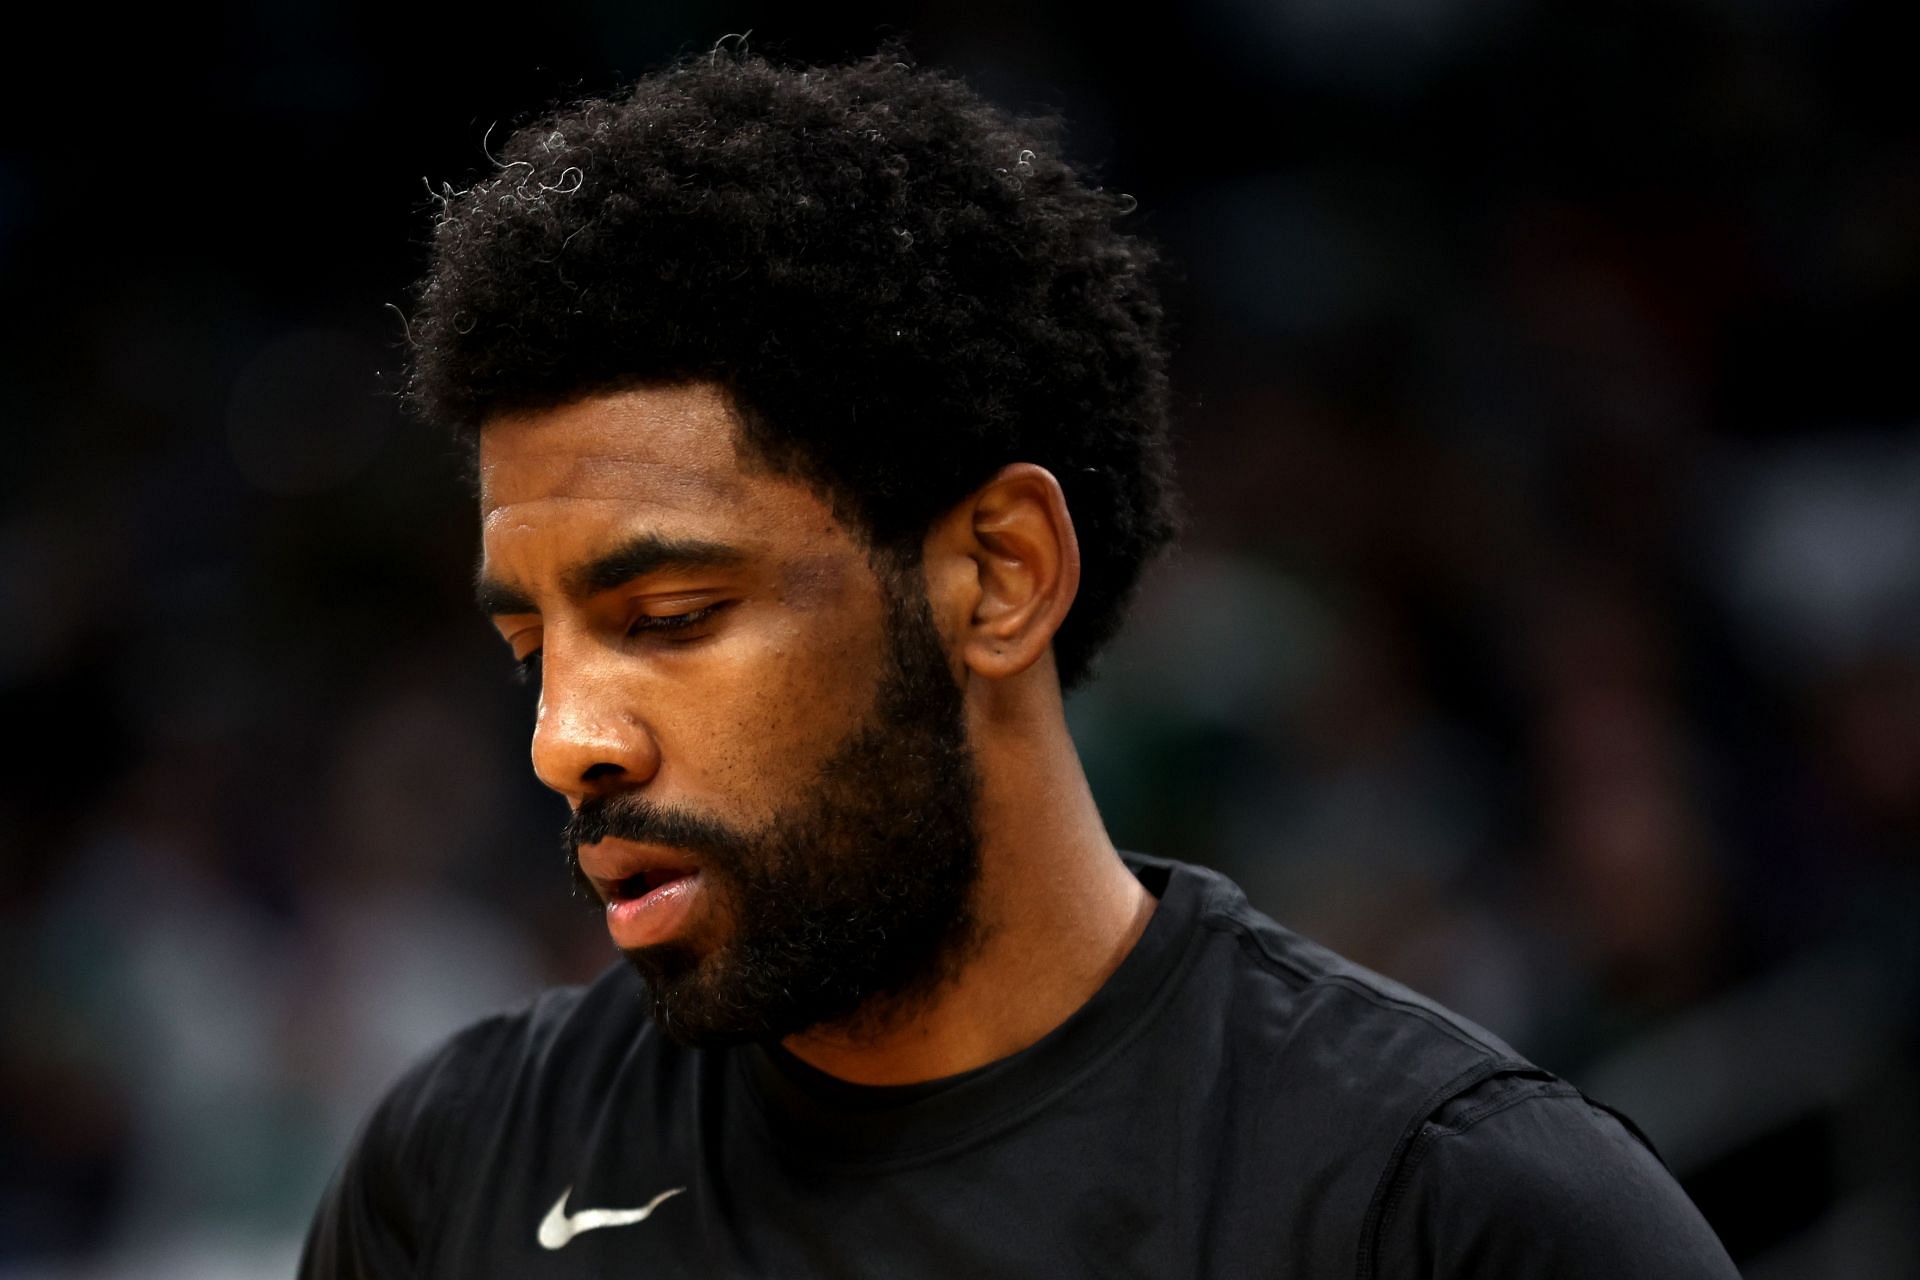 Kyrie Irving of the Brooklyn Nets in the 2022 NBA playoffs